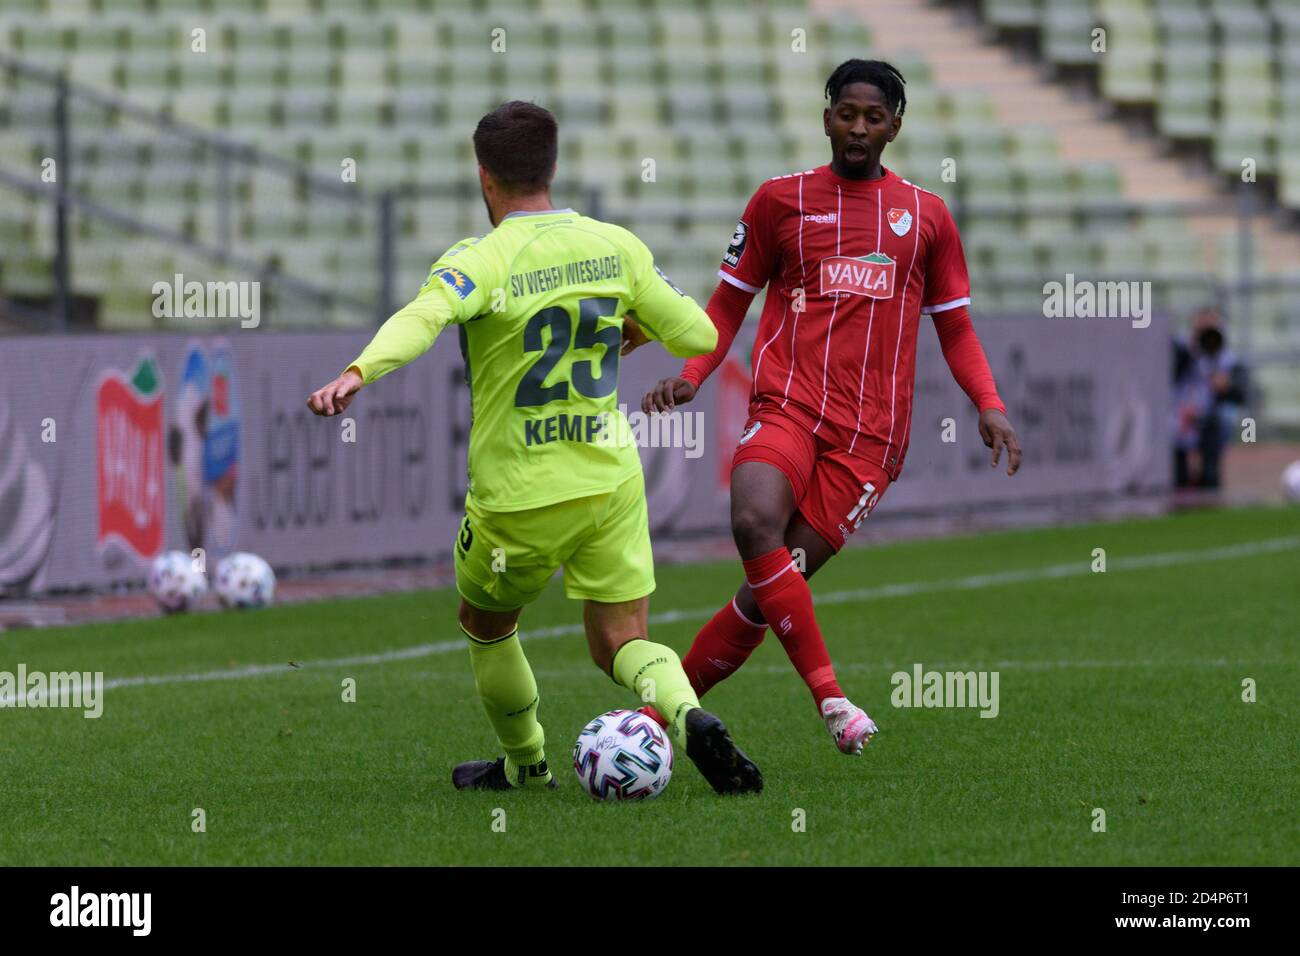 Munich, Germany. 10th Oct, 2020. Boubacar Barry (#18 Tuerkguecue Muenchen) during the 3. Liga match between Tuerkguecue Muenchen and Wehen Wiesbaden. First football match played in the Olympiastadion since 2012. Sven Beyrich/SPP Credit: SPP Sport Press Photo. /Alamy Live News Stock Photo